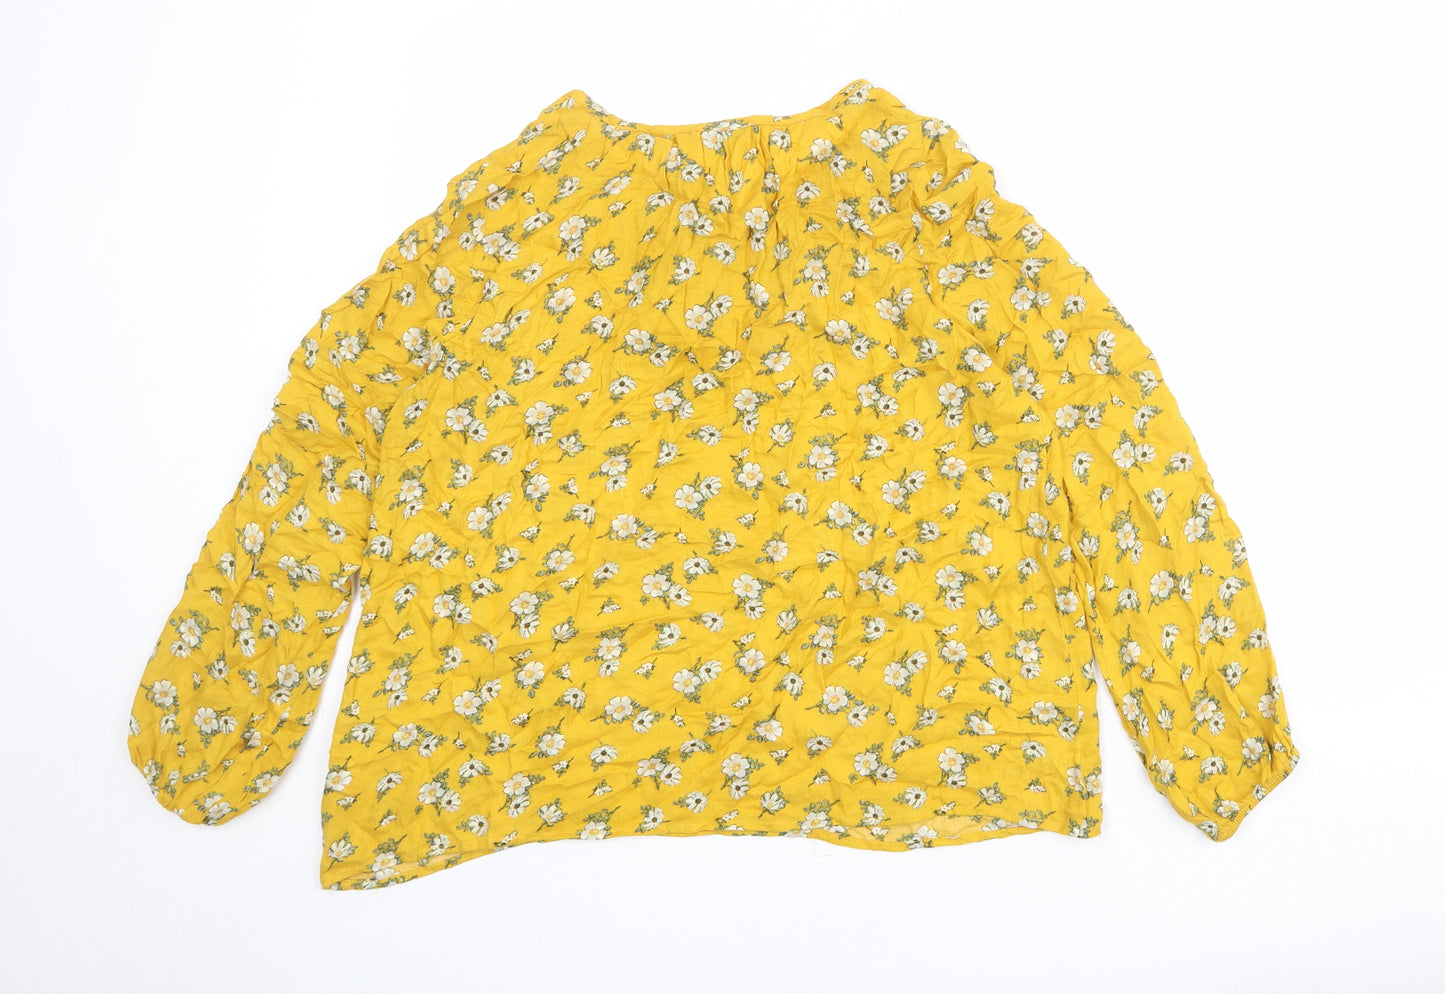 New Look Womens Yellow Floral Viscose Basic Blouse Size 10 Boat Neck